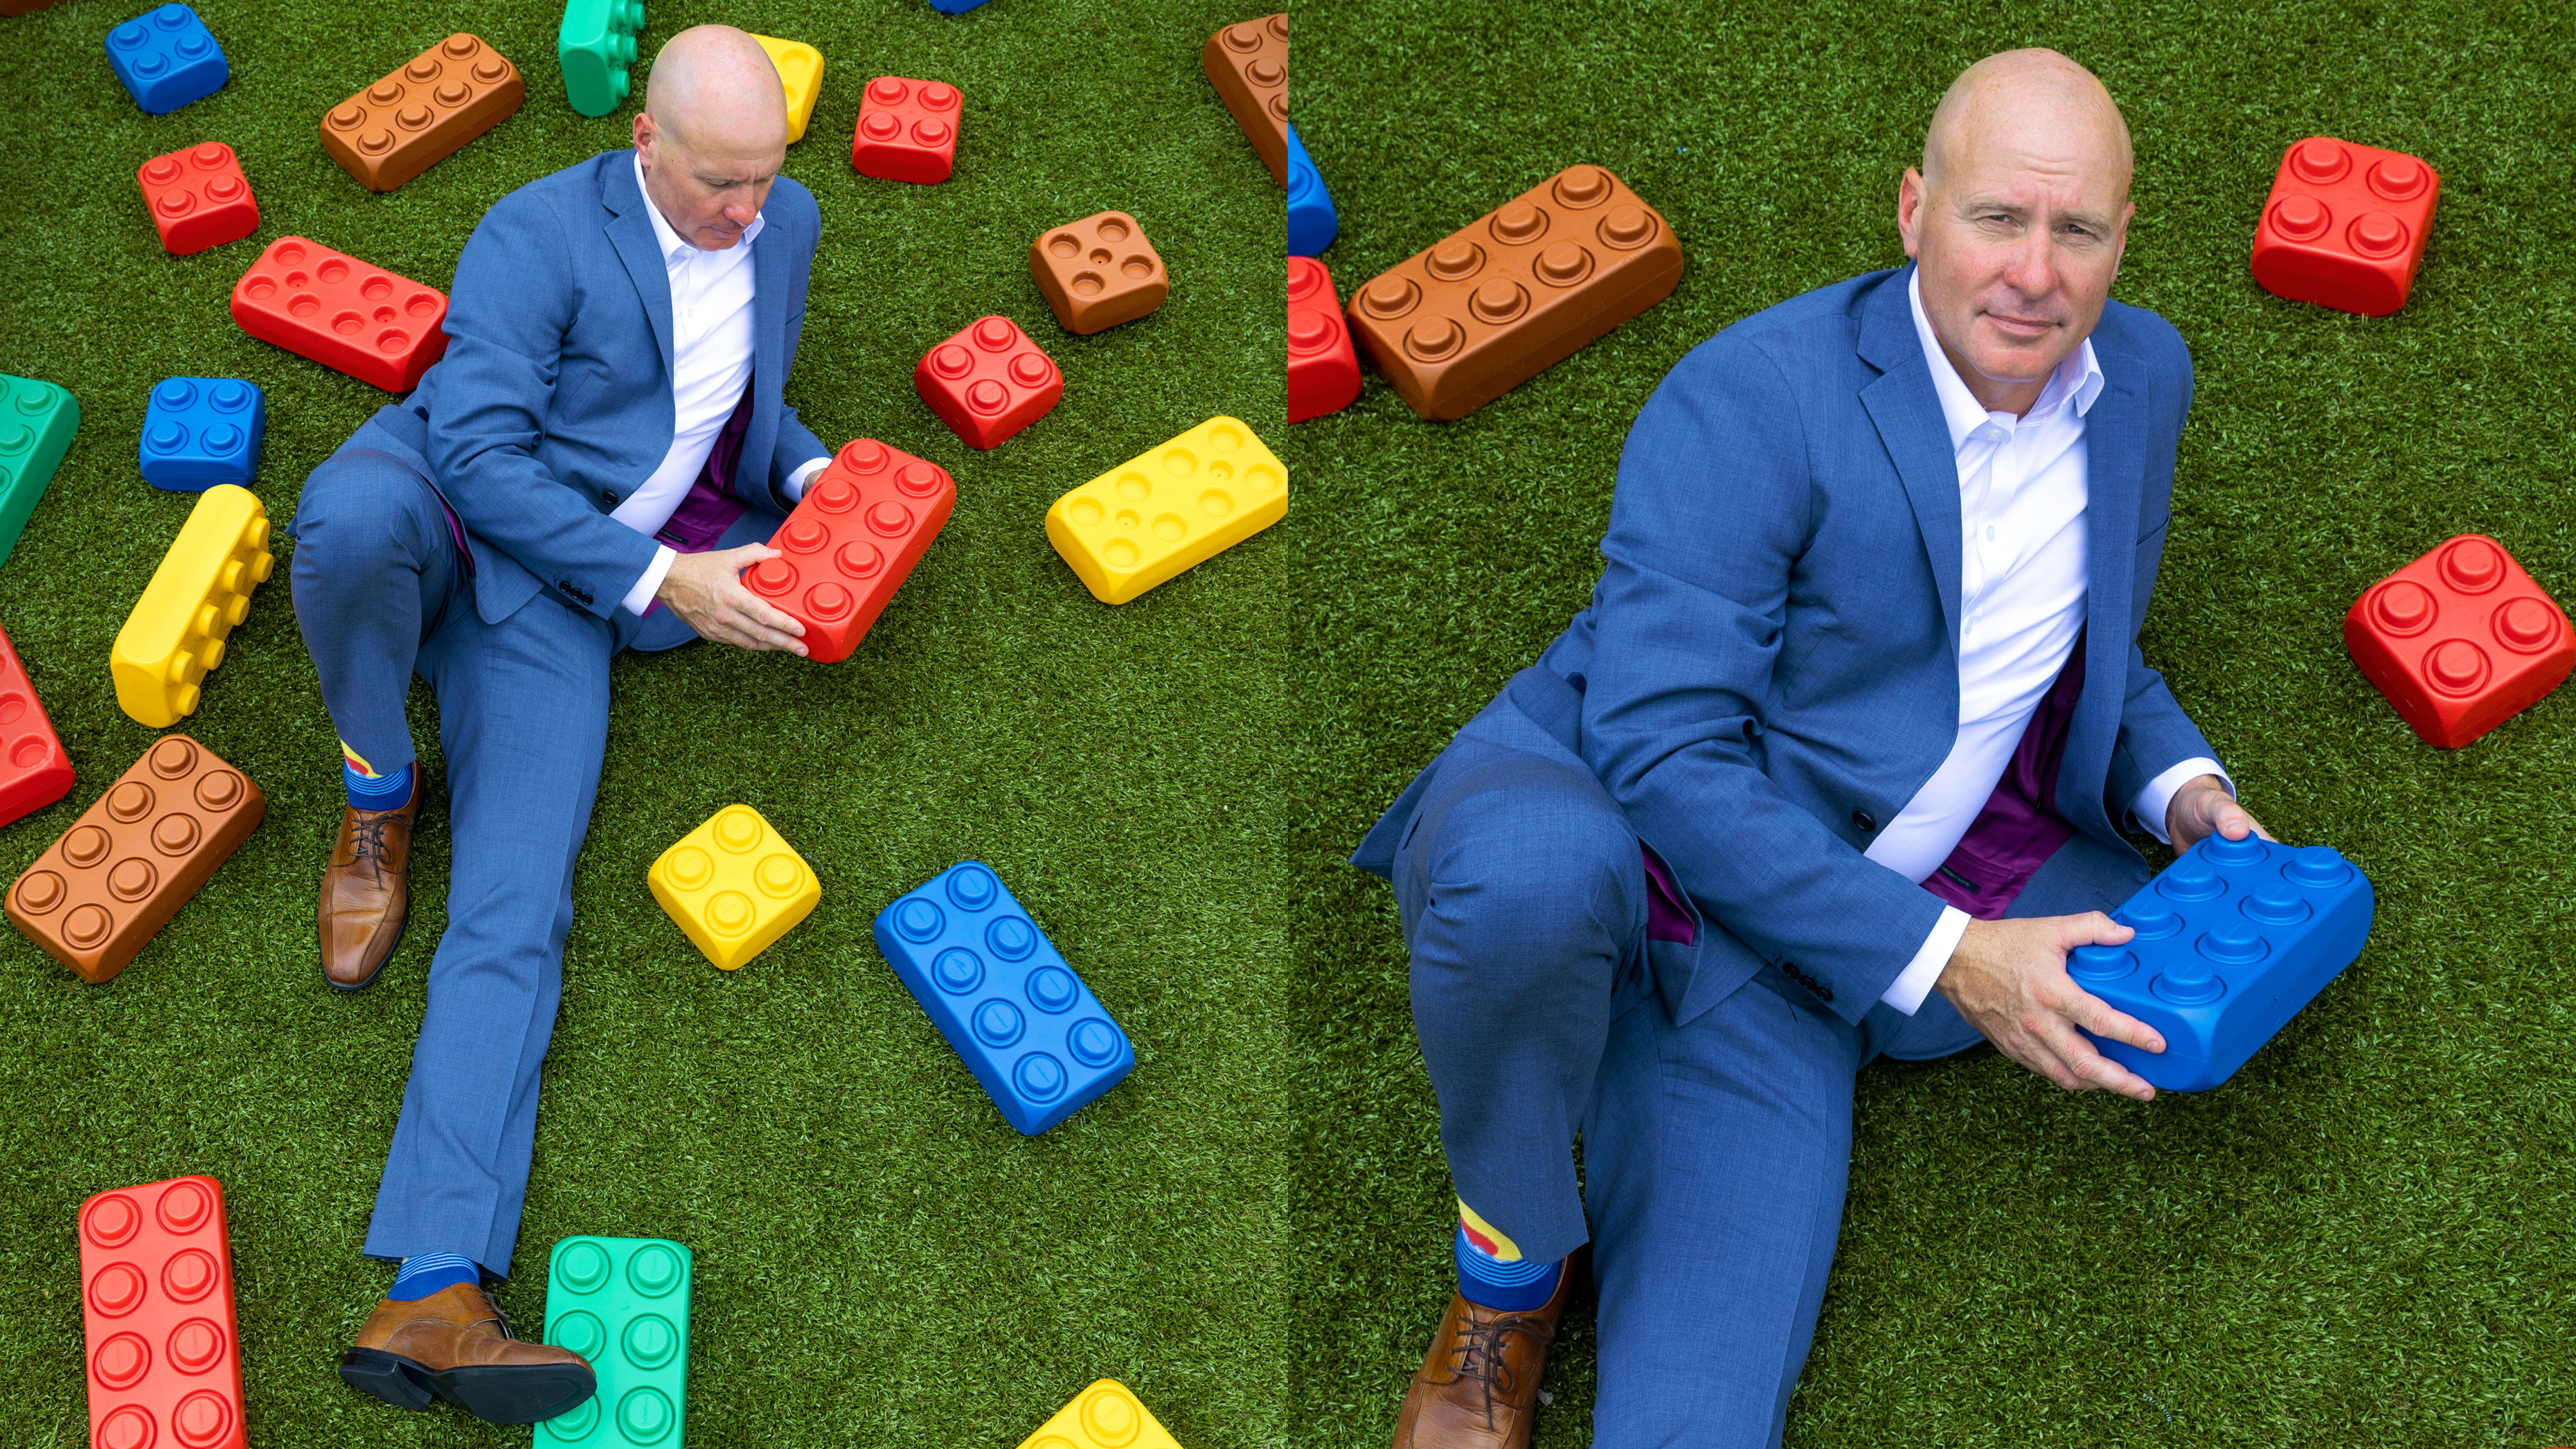 Two-part image showing Greater Waterbury YMCA CEO Jim O'Rourke with playground blocks